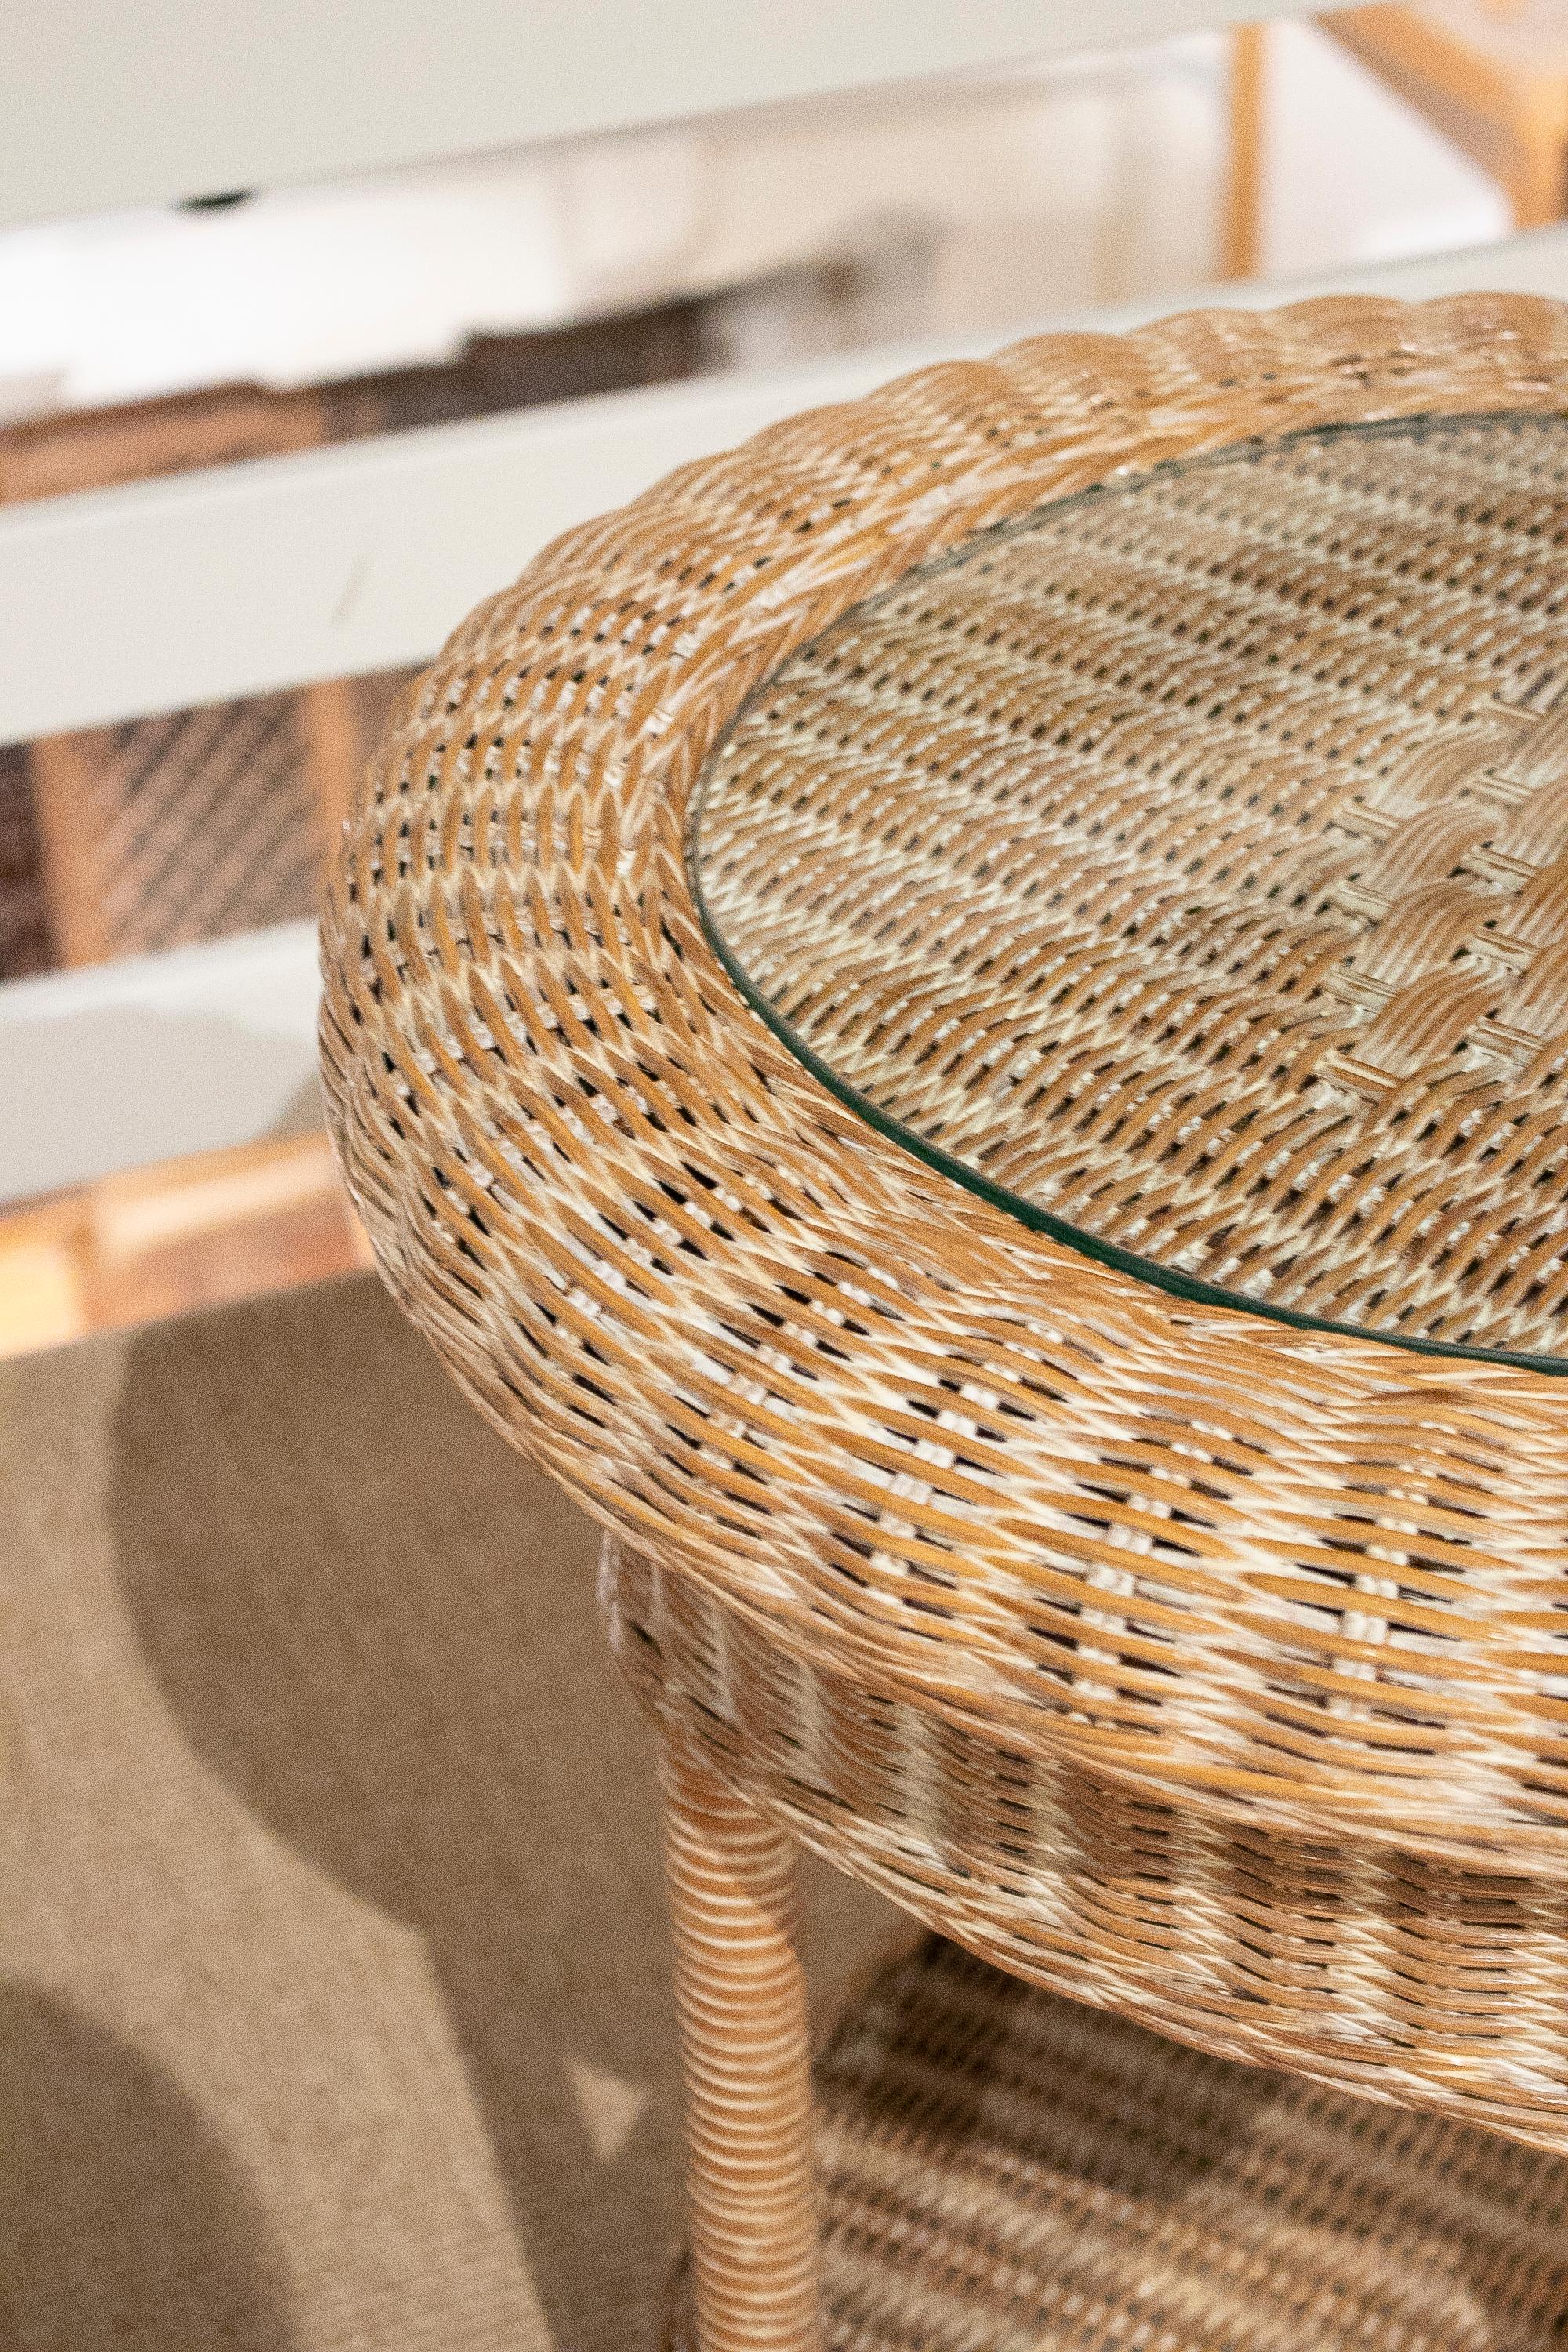 outdoor wicker side table with glass top